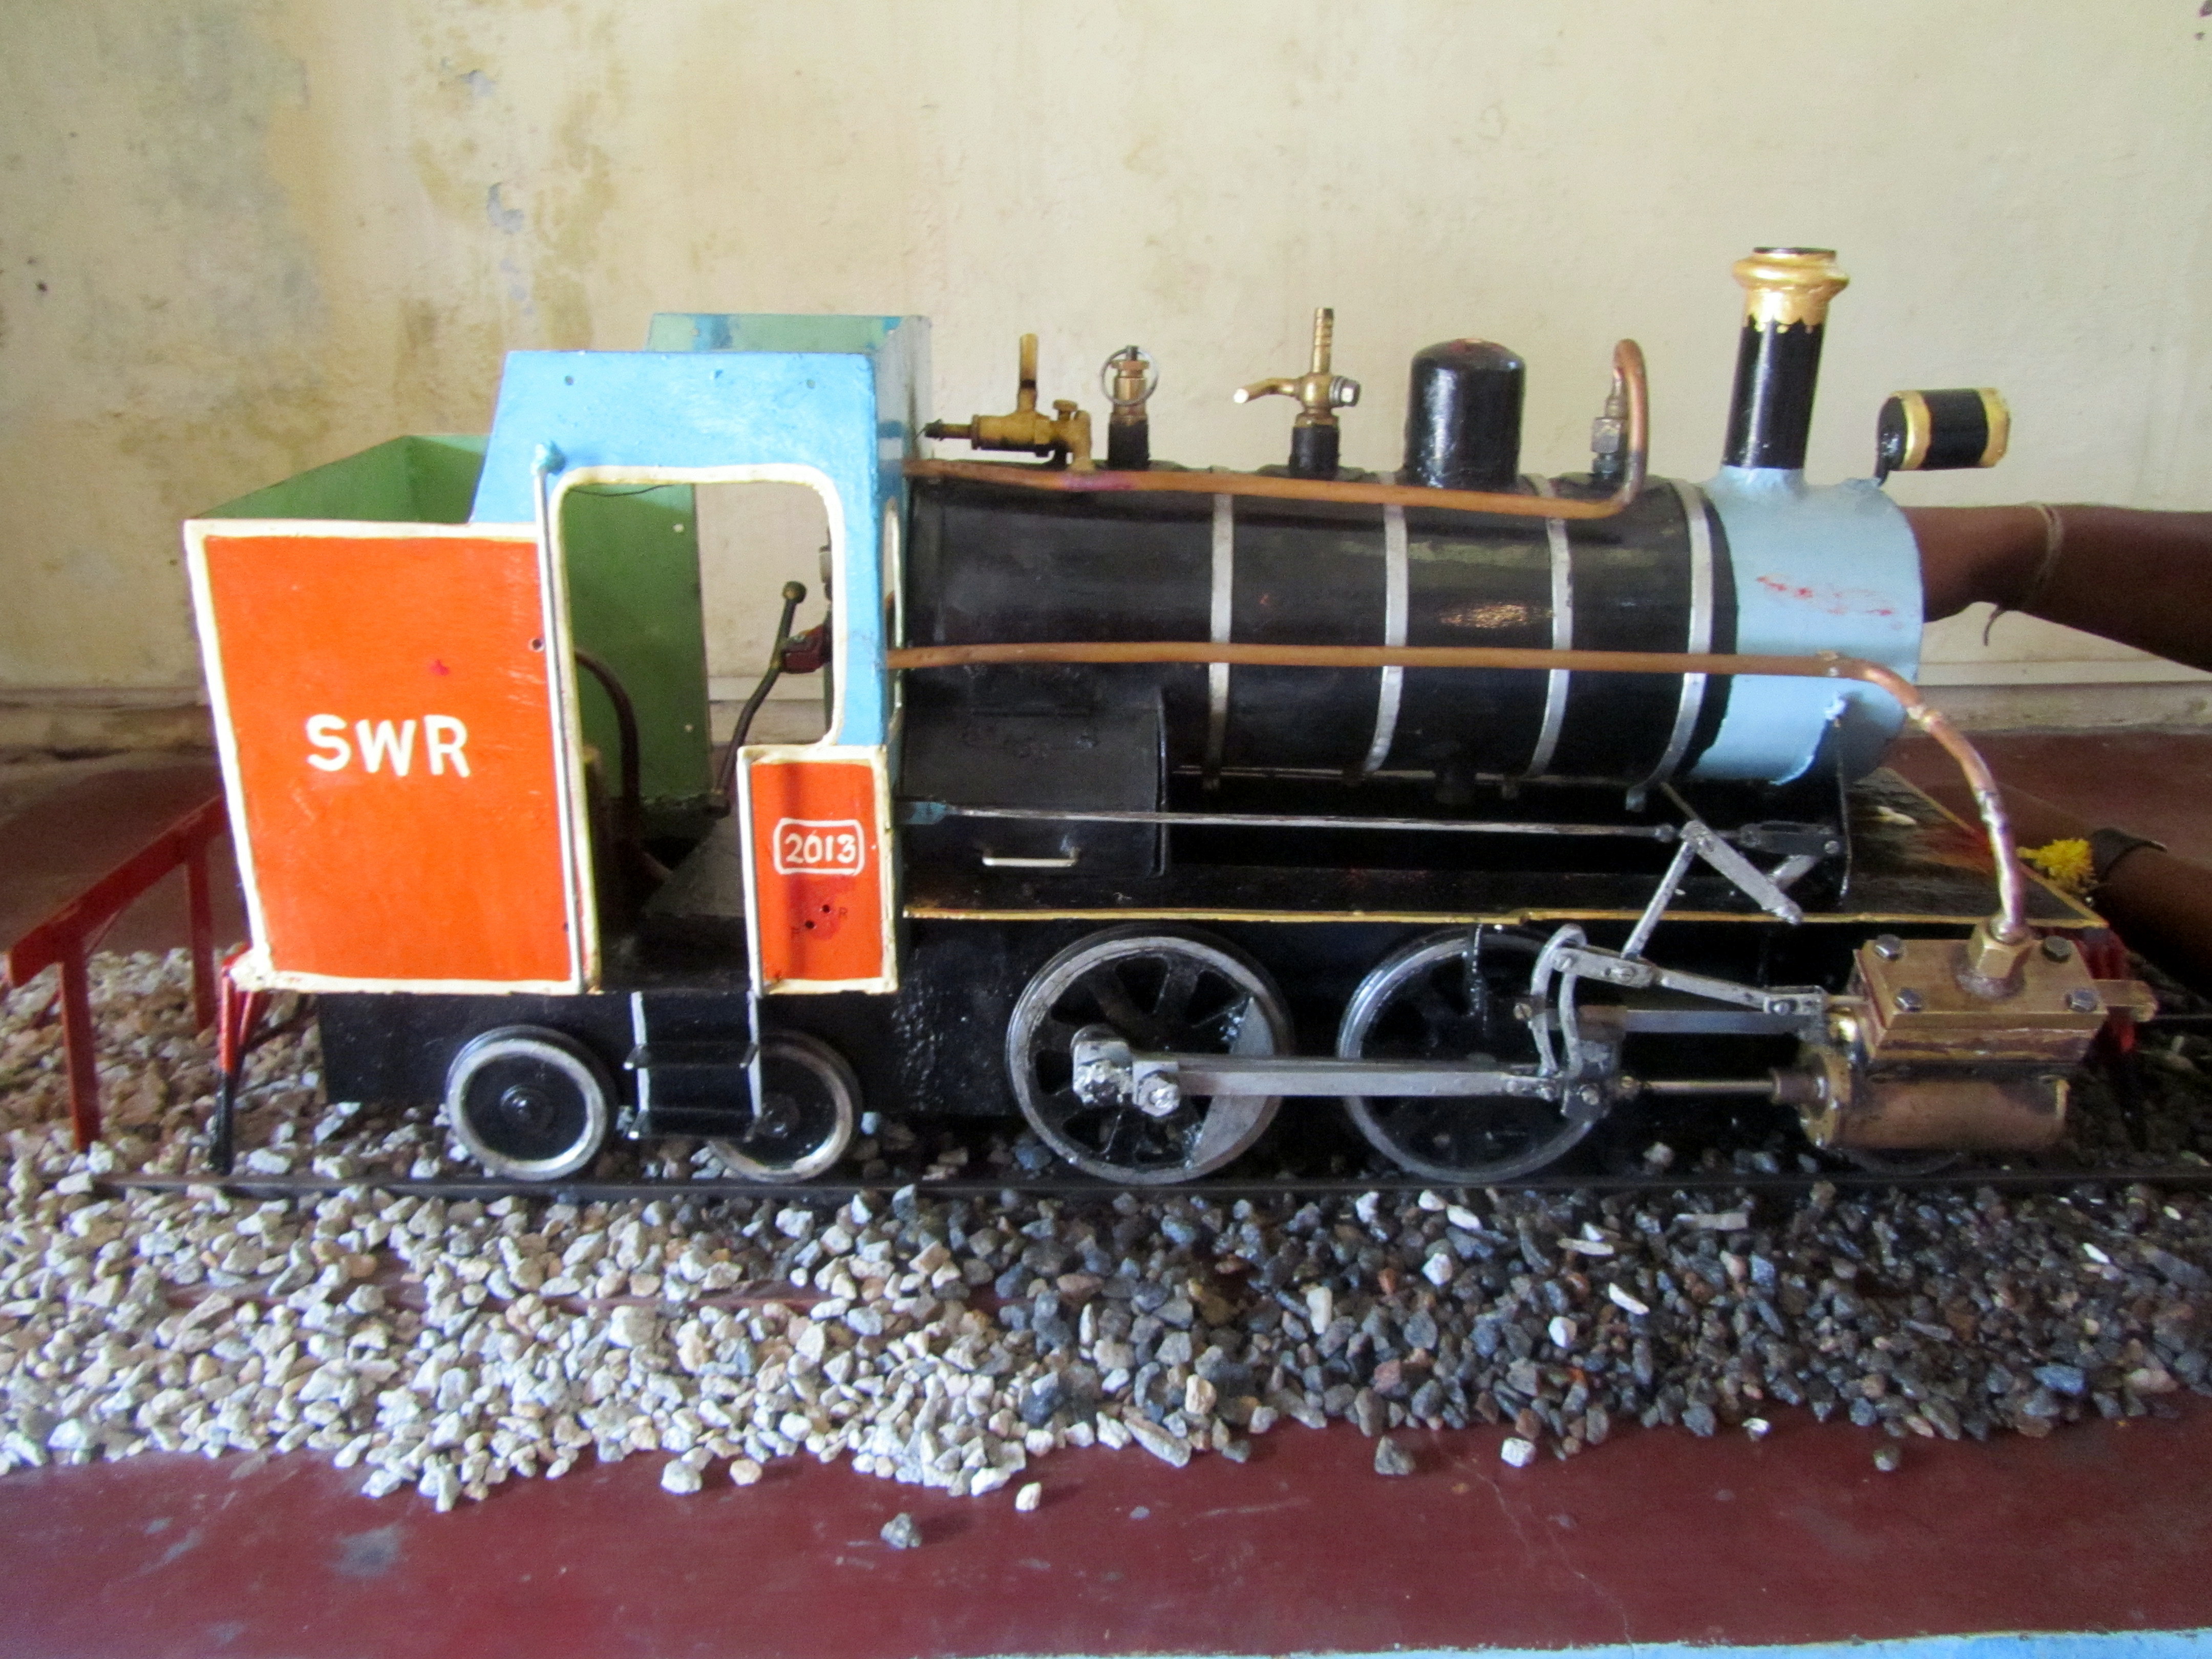 A miniature model of an engine at the Rail Museum